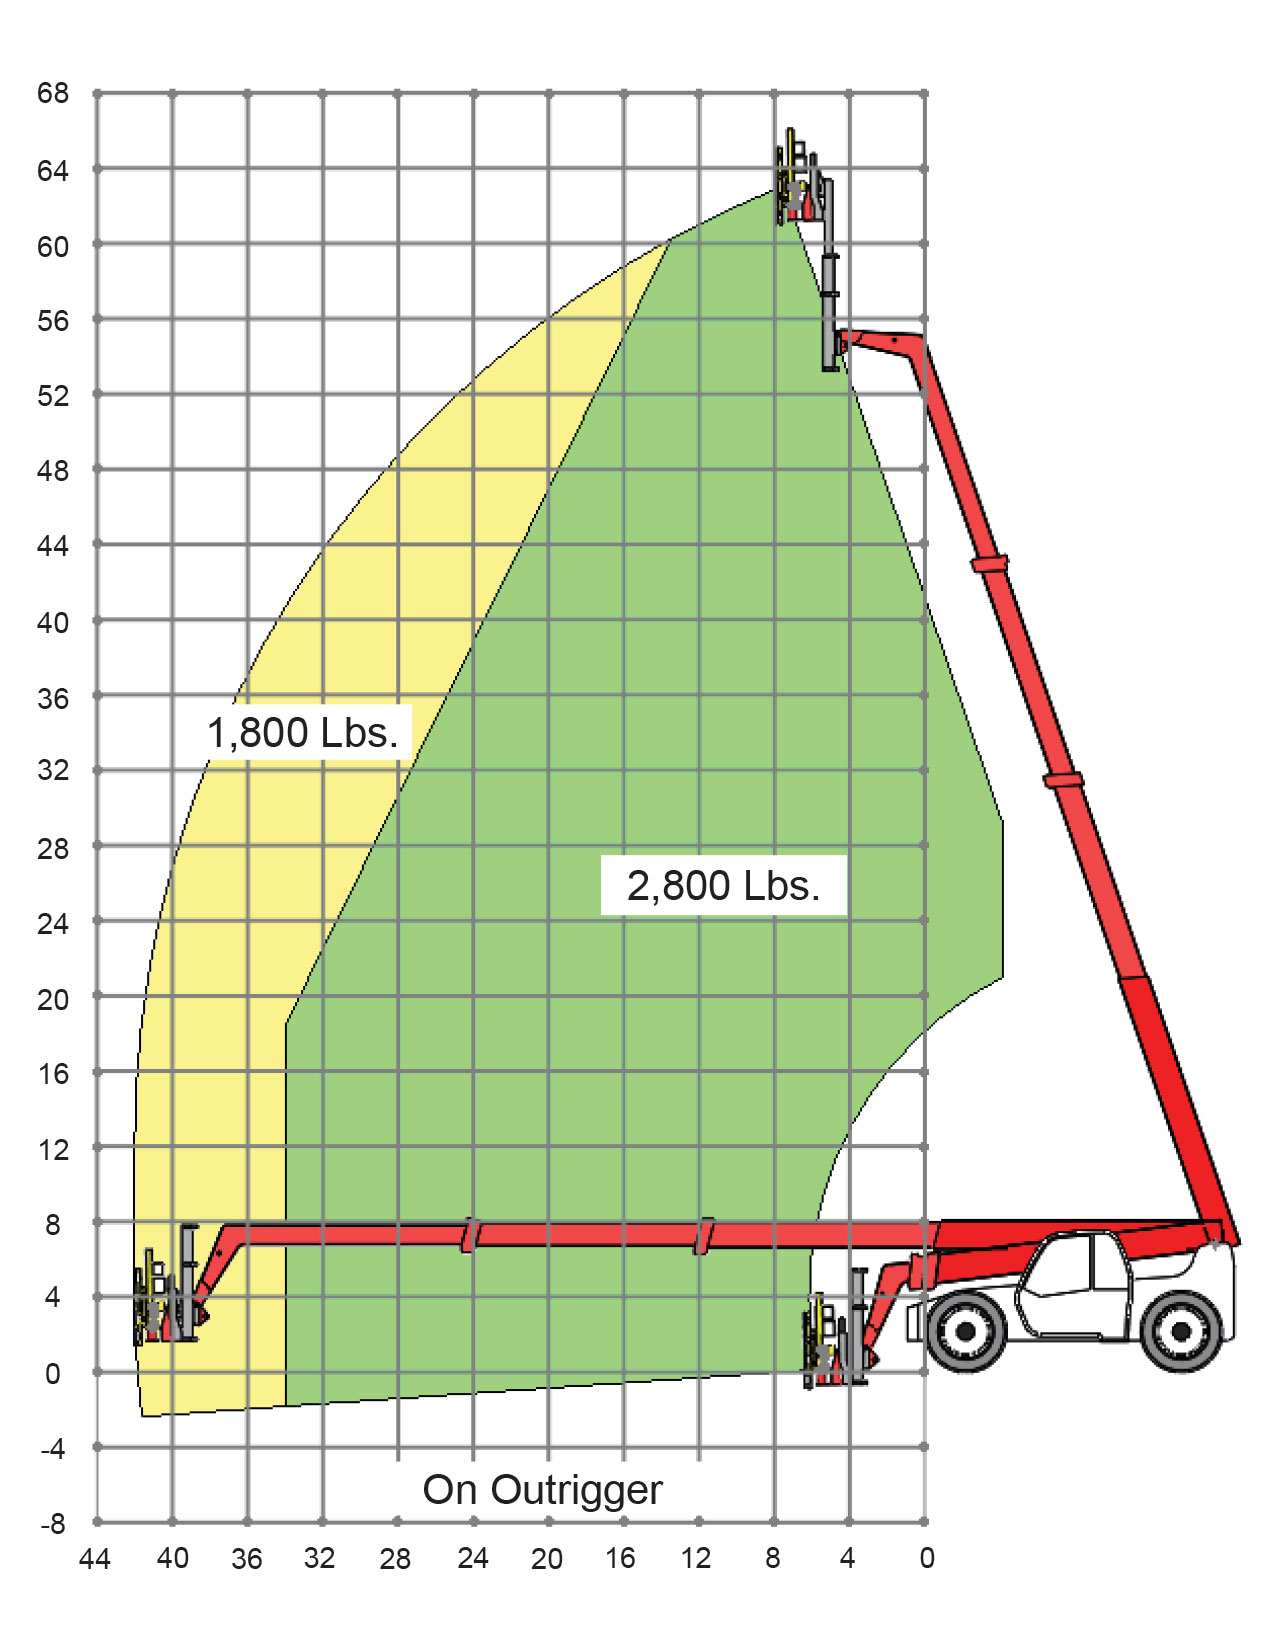 2863 Glass Handler Load Capacity Chart on Outrigger